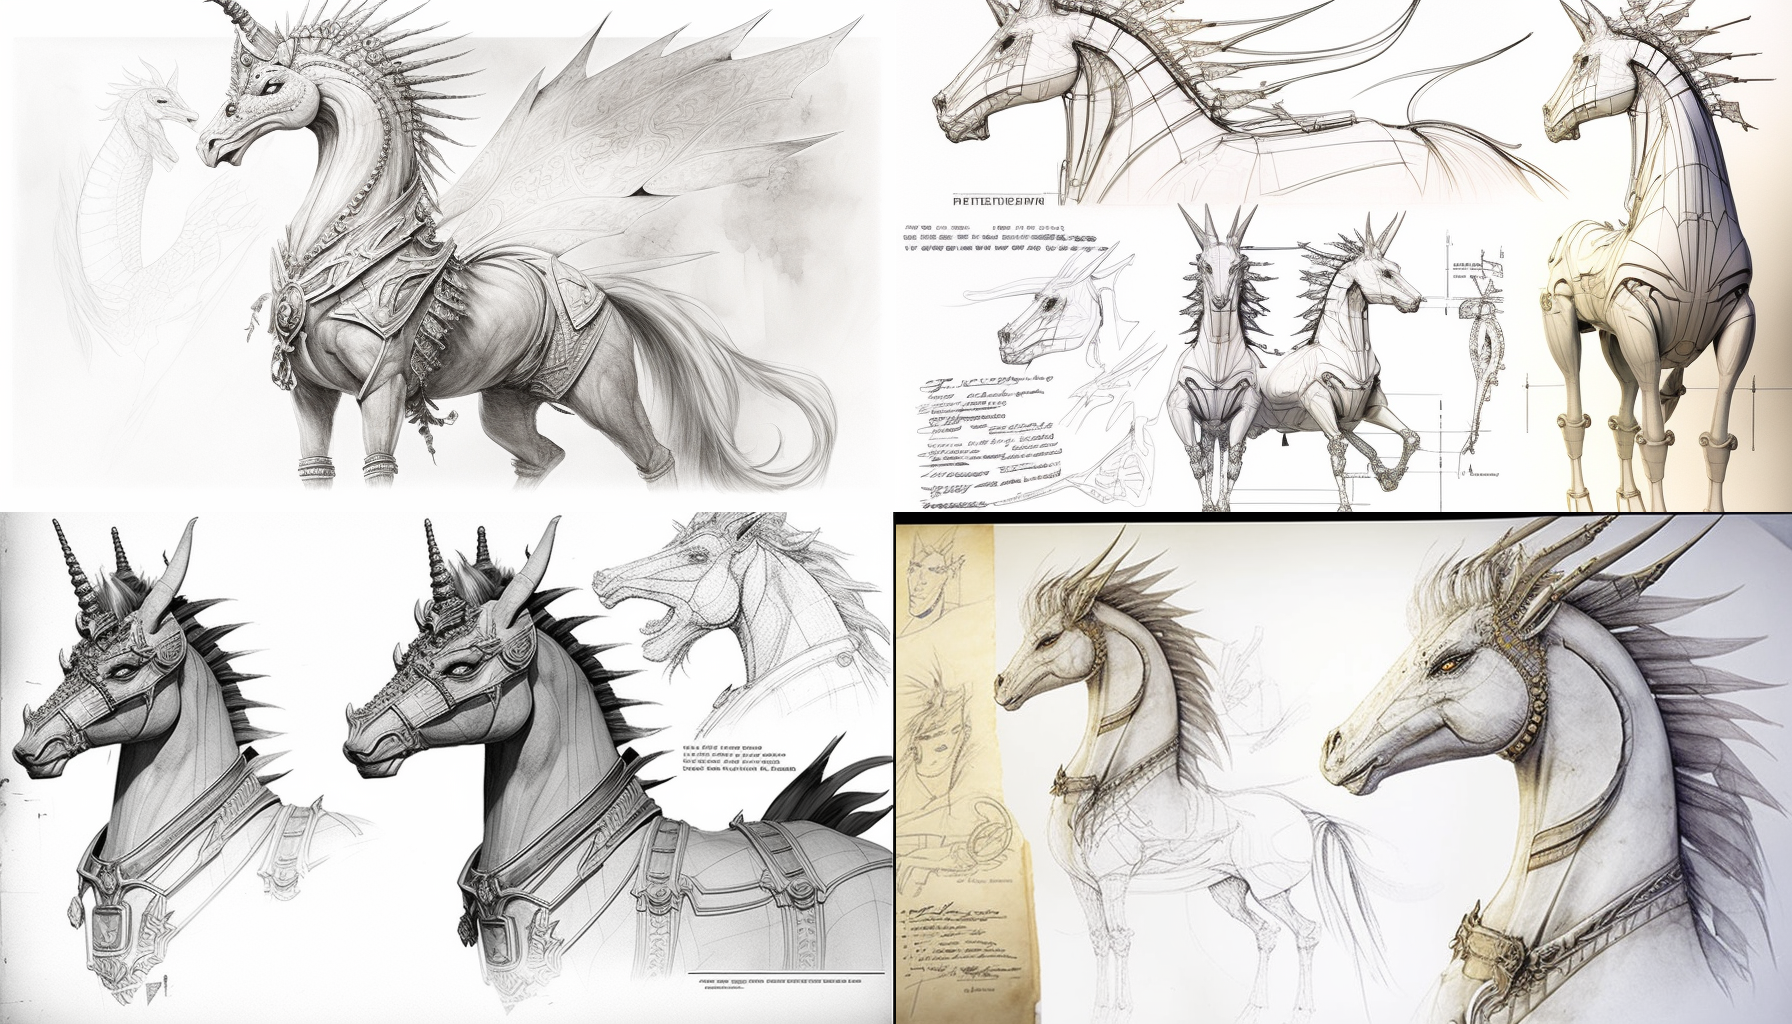 66yyyh_Sinosaurus_horseJourney_to_the_Westconcept_design_sheetw_213c8c1b-62f8-42.png